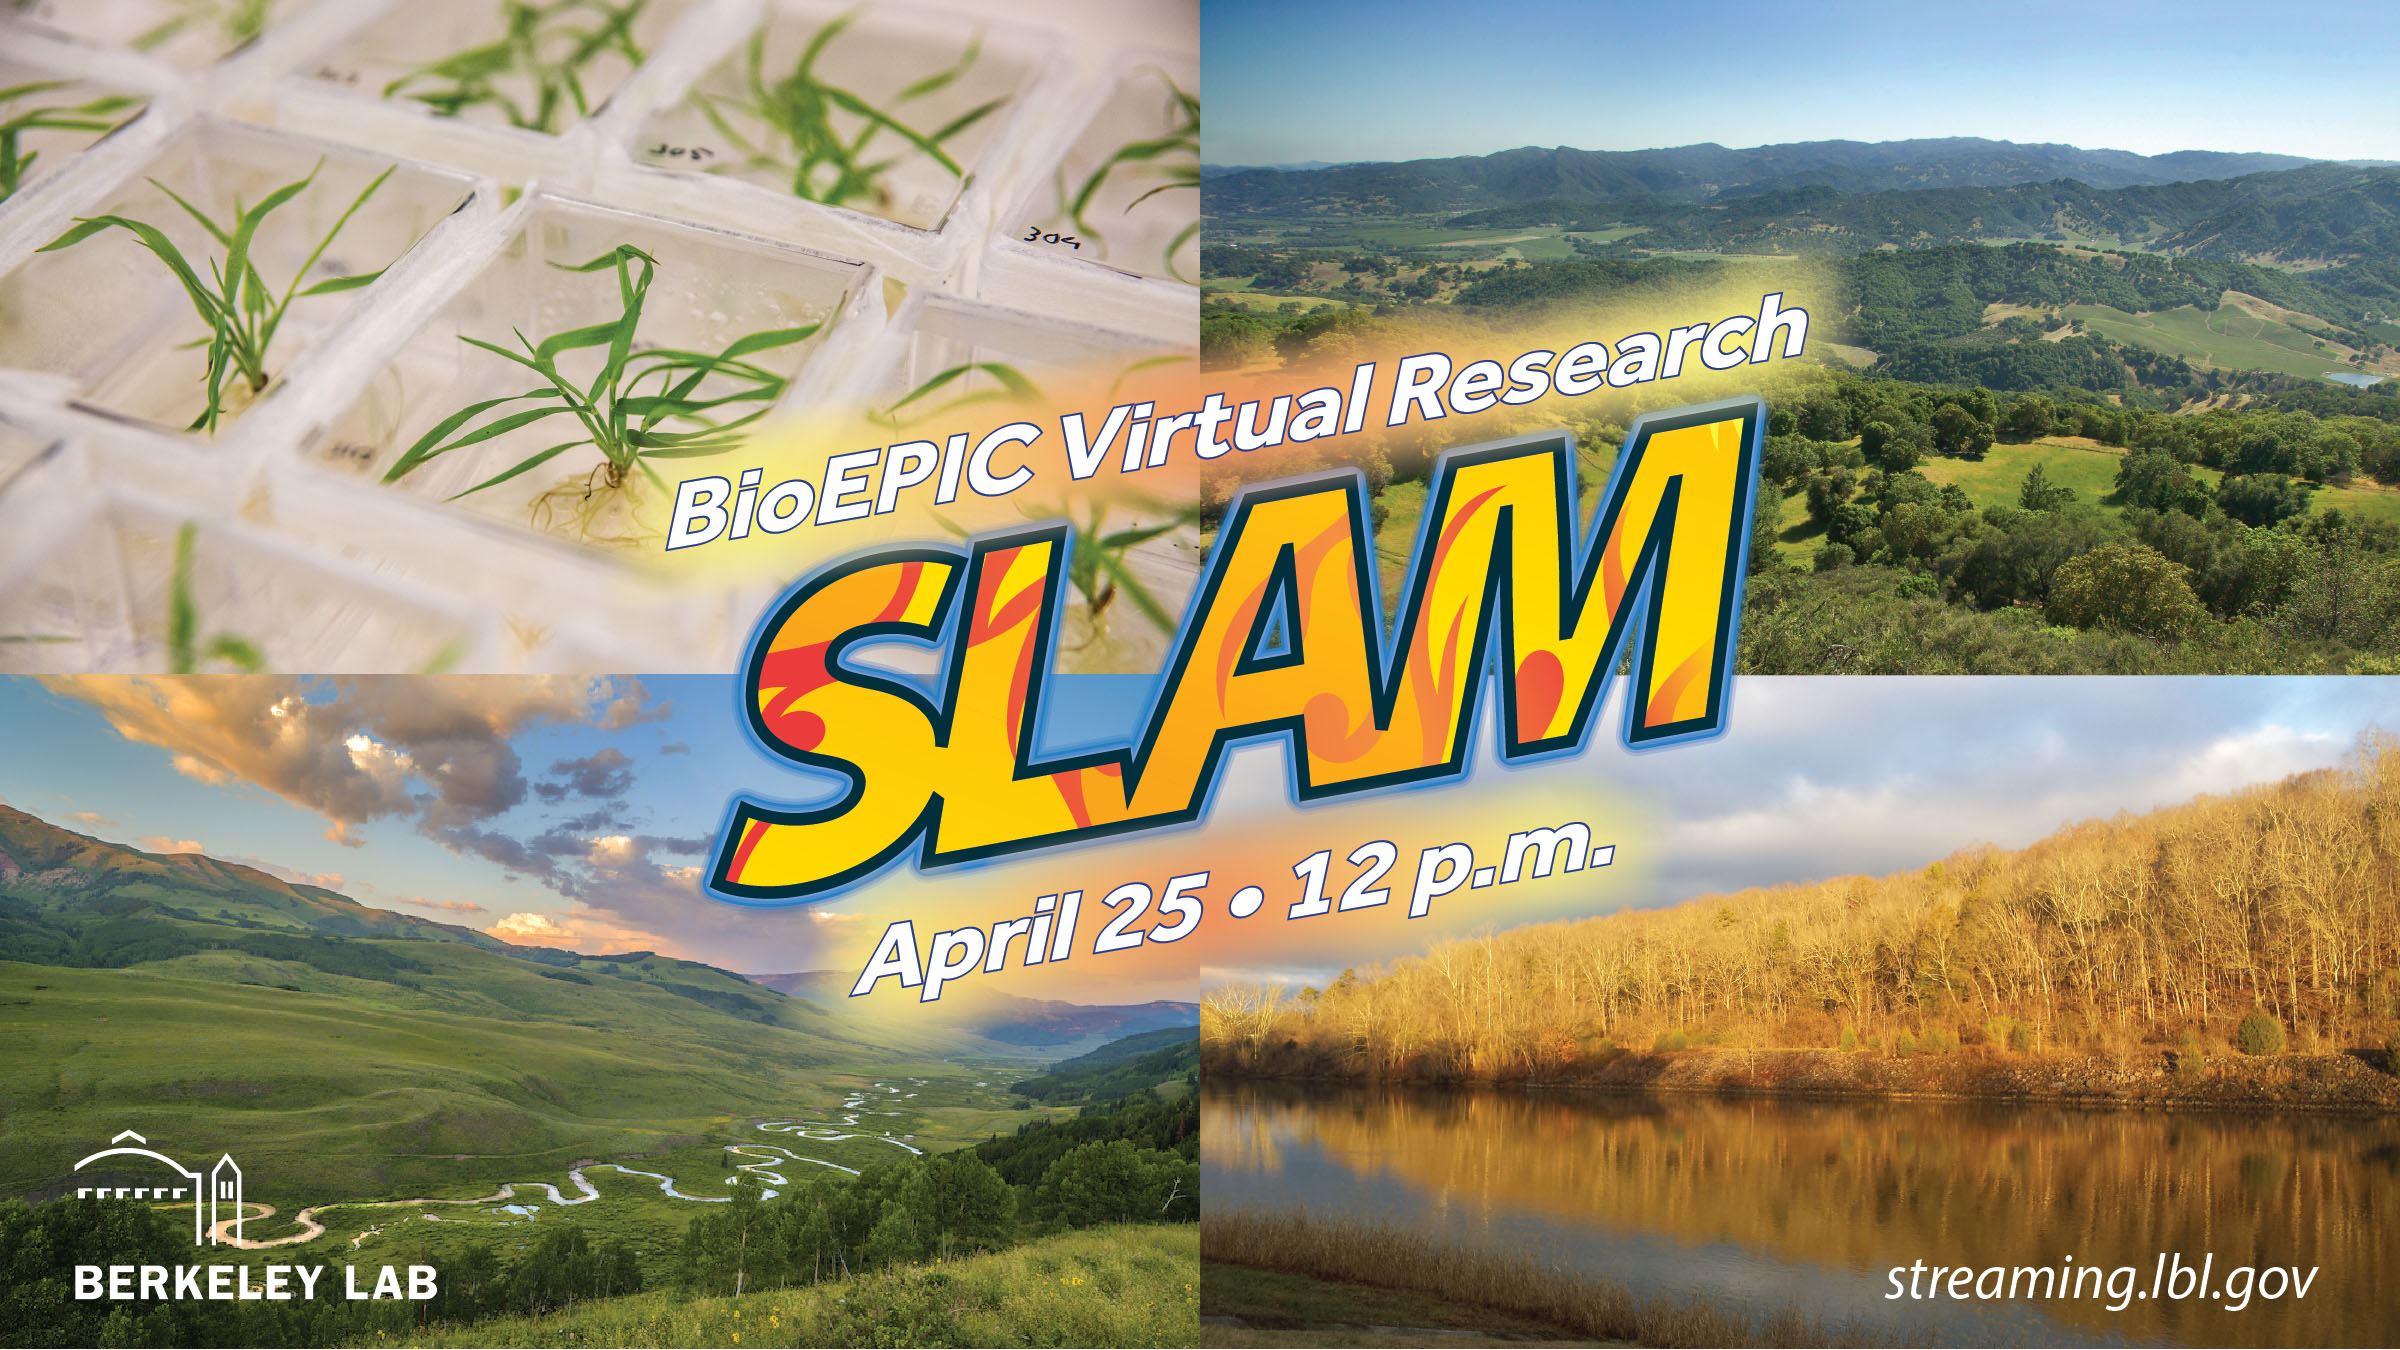 Graphic composite of four environmental photos with text overlaid "BioEPIC Virtual Research SLAM, April 25 - 12p.m."